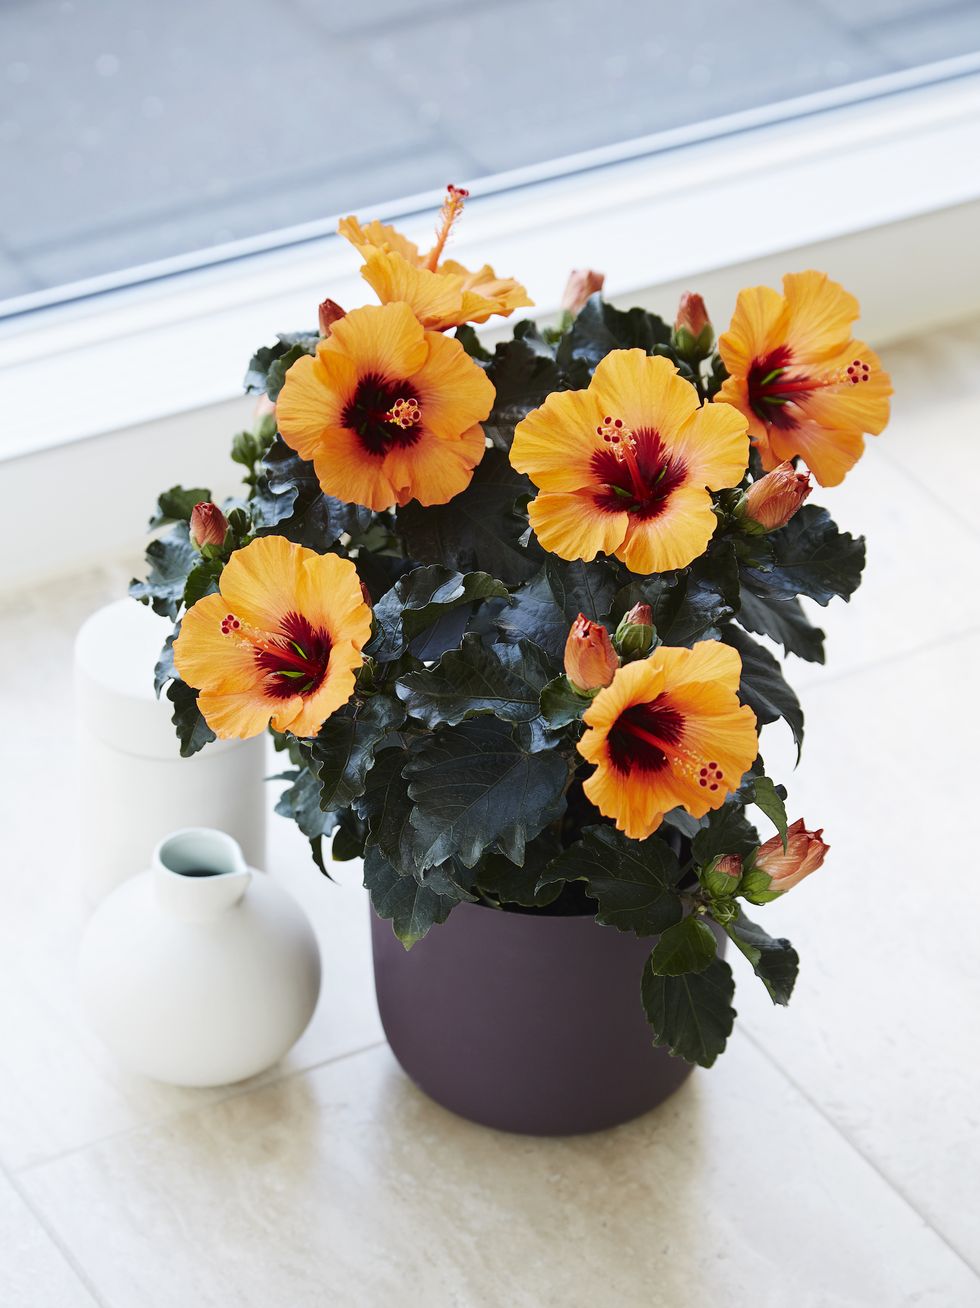 <p>This newly developed type of Hibiscus has shiny, dark foliage and bright and beautiful flowers. It was created for consumers who want a more <a href="http://www.housebeautiful.co.uk/garden/plants/g197/benefits-of-houseplants/" data-tracking-id="recirc-text-link">minimalist plant</a> but which still retains an exotic flavour.&nbsp;</p>